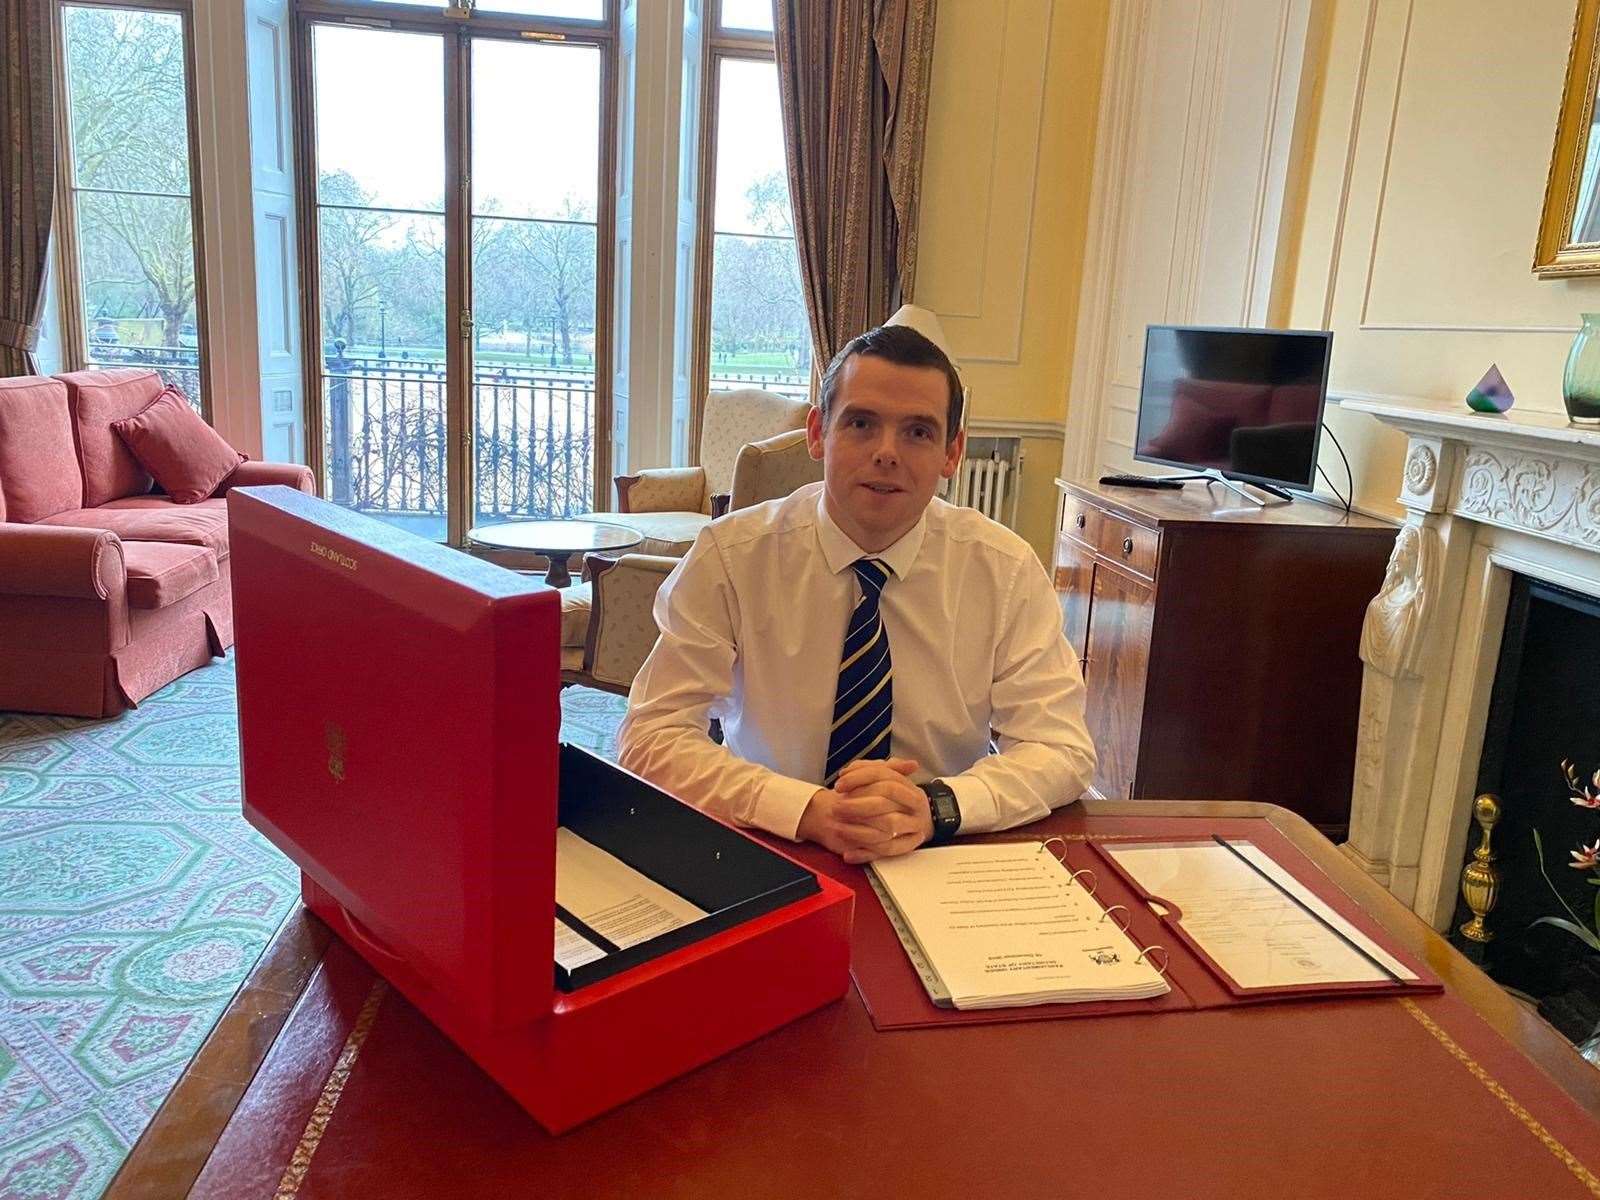 Douglas Ross served as Parliamentary Secretary of State for Scotland after his re-election in 2019.